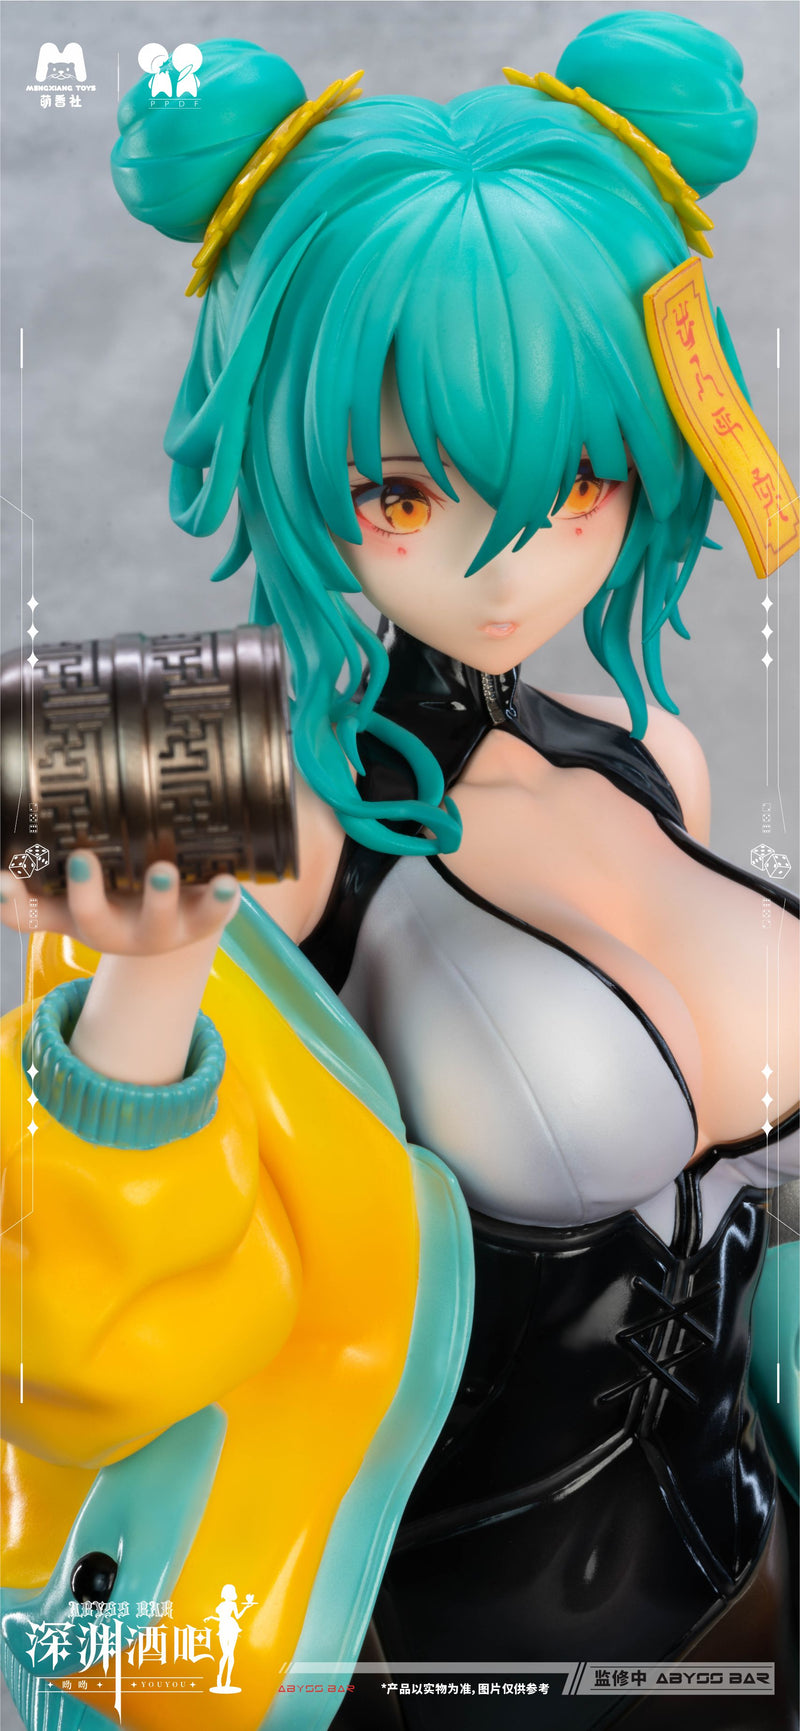 Abyss Bar You-you | 1/4 Scale Figure